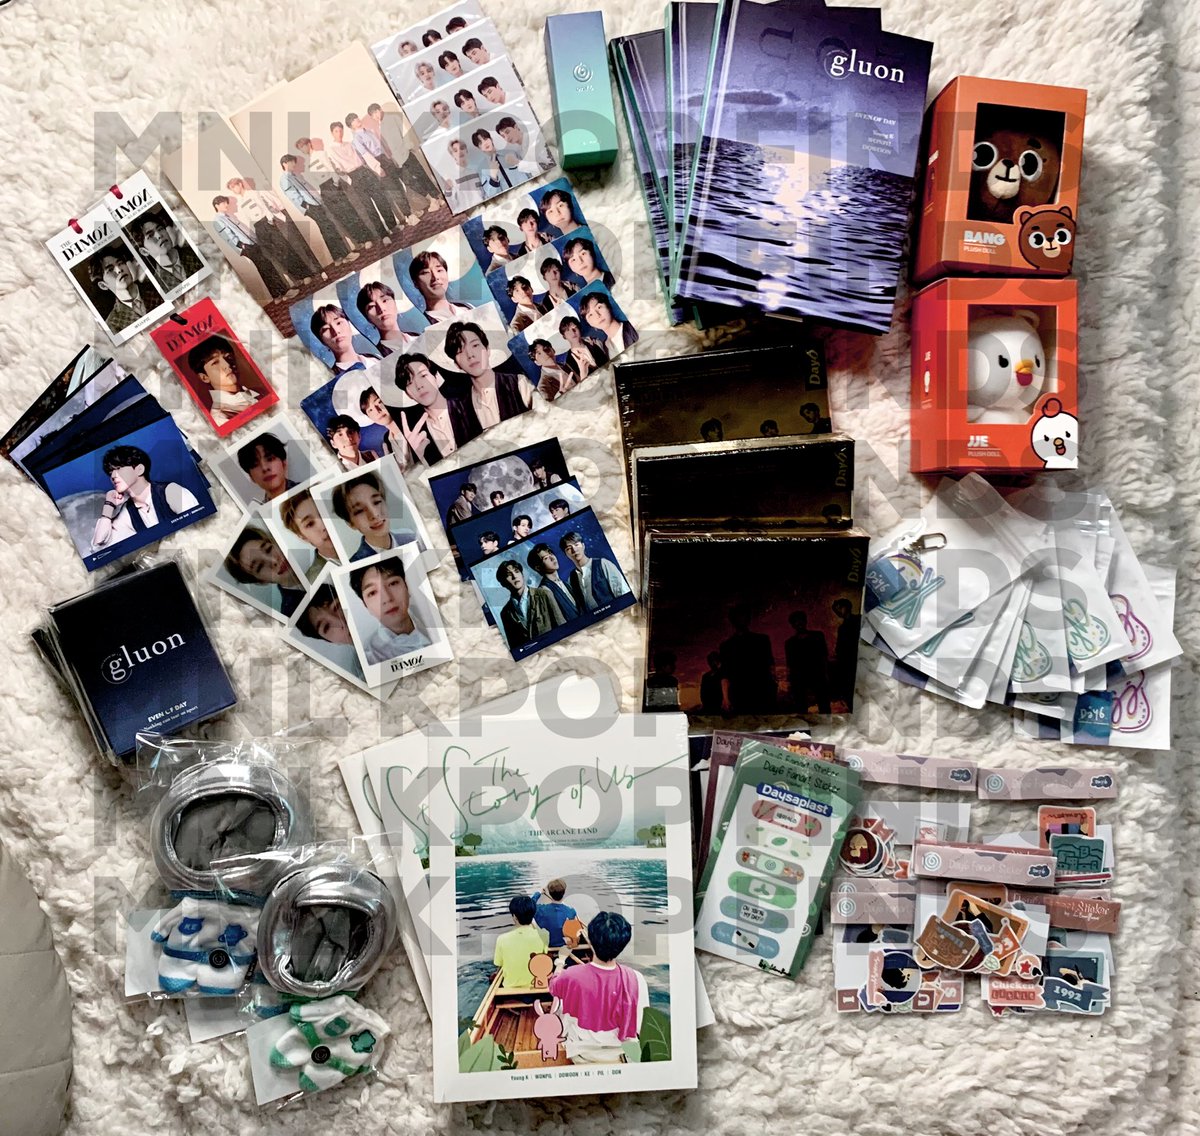  Thread of Day6 On-hand Items  #MNLKPFOnhand Onhand | Ready to ship 3 days reservation only with freebies from  @mnlkpopfinds Comment mine + item code Deleted “mine” will be blocked